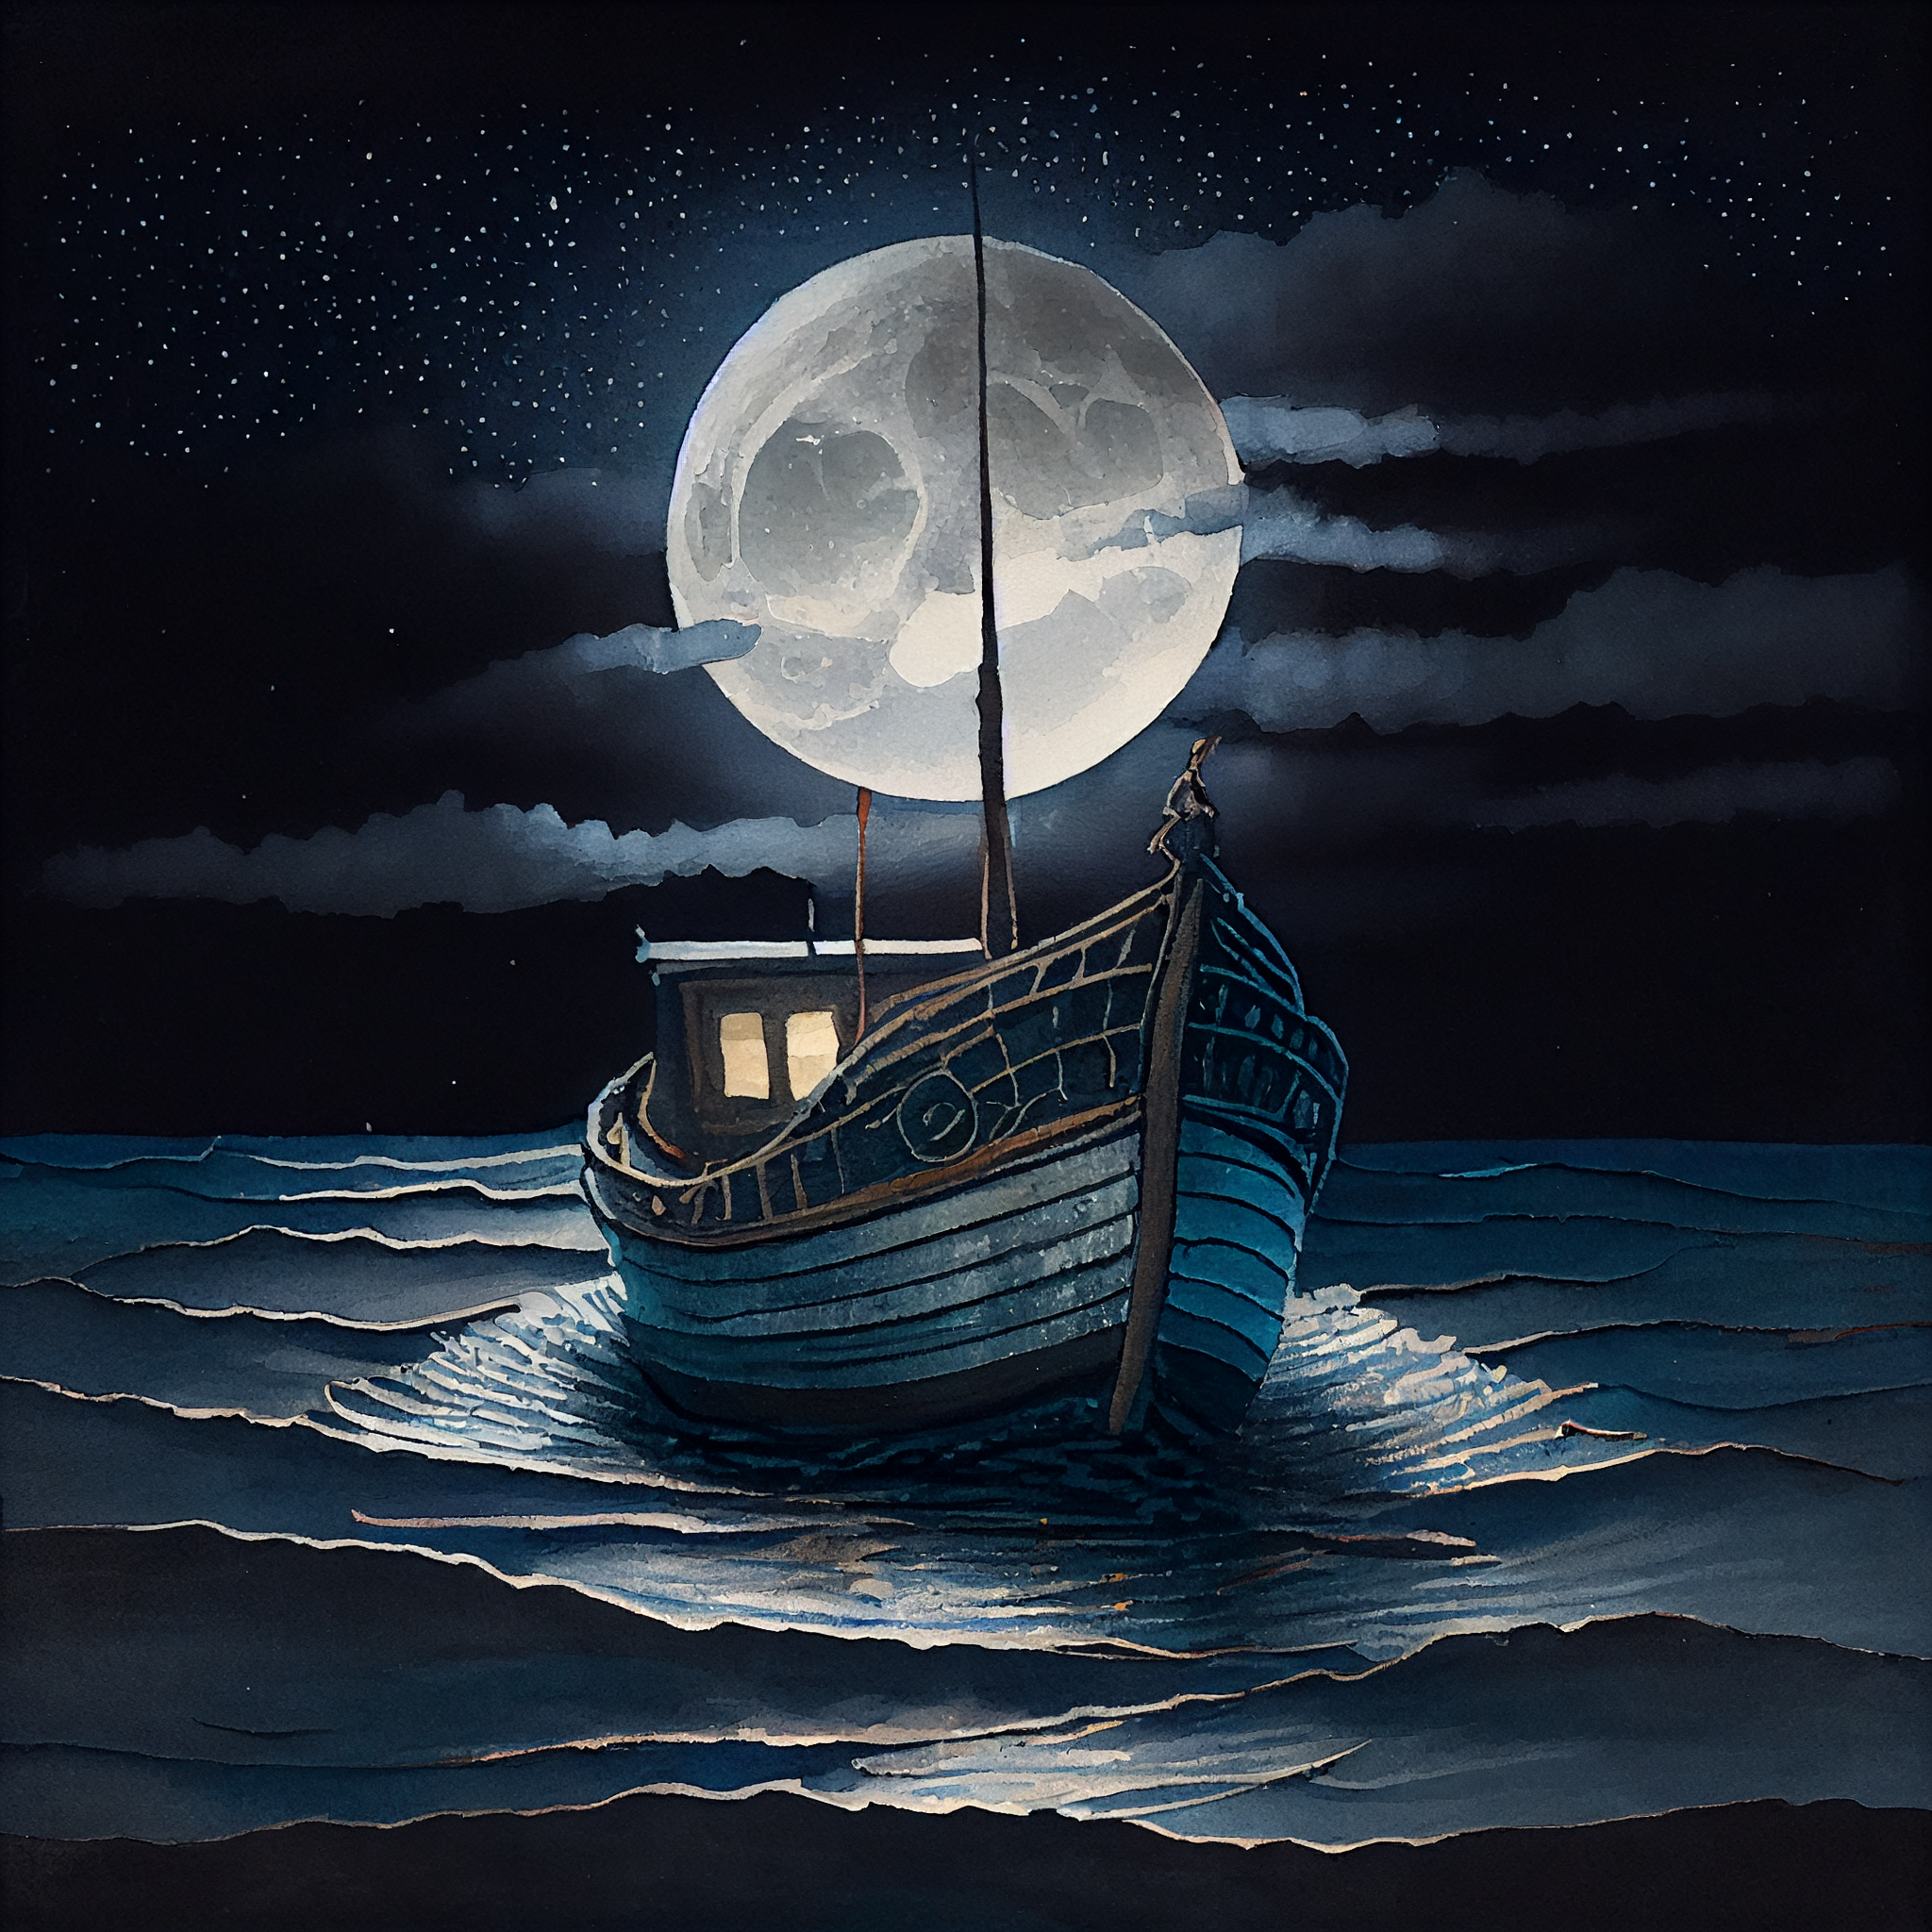 A Serene Sailing: A Stunning Watercolor Painting Print of a Wooden Boat under the Full Moon